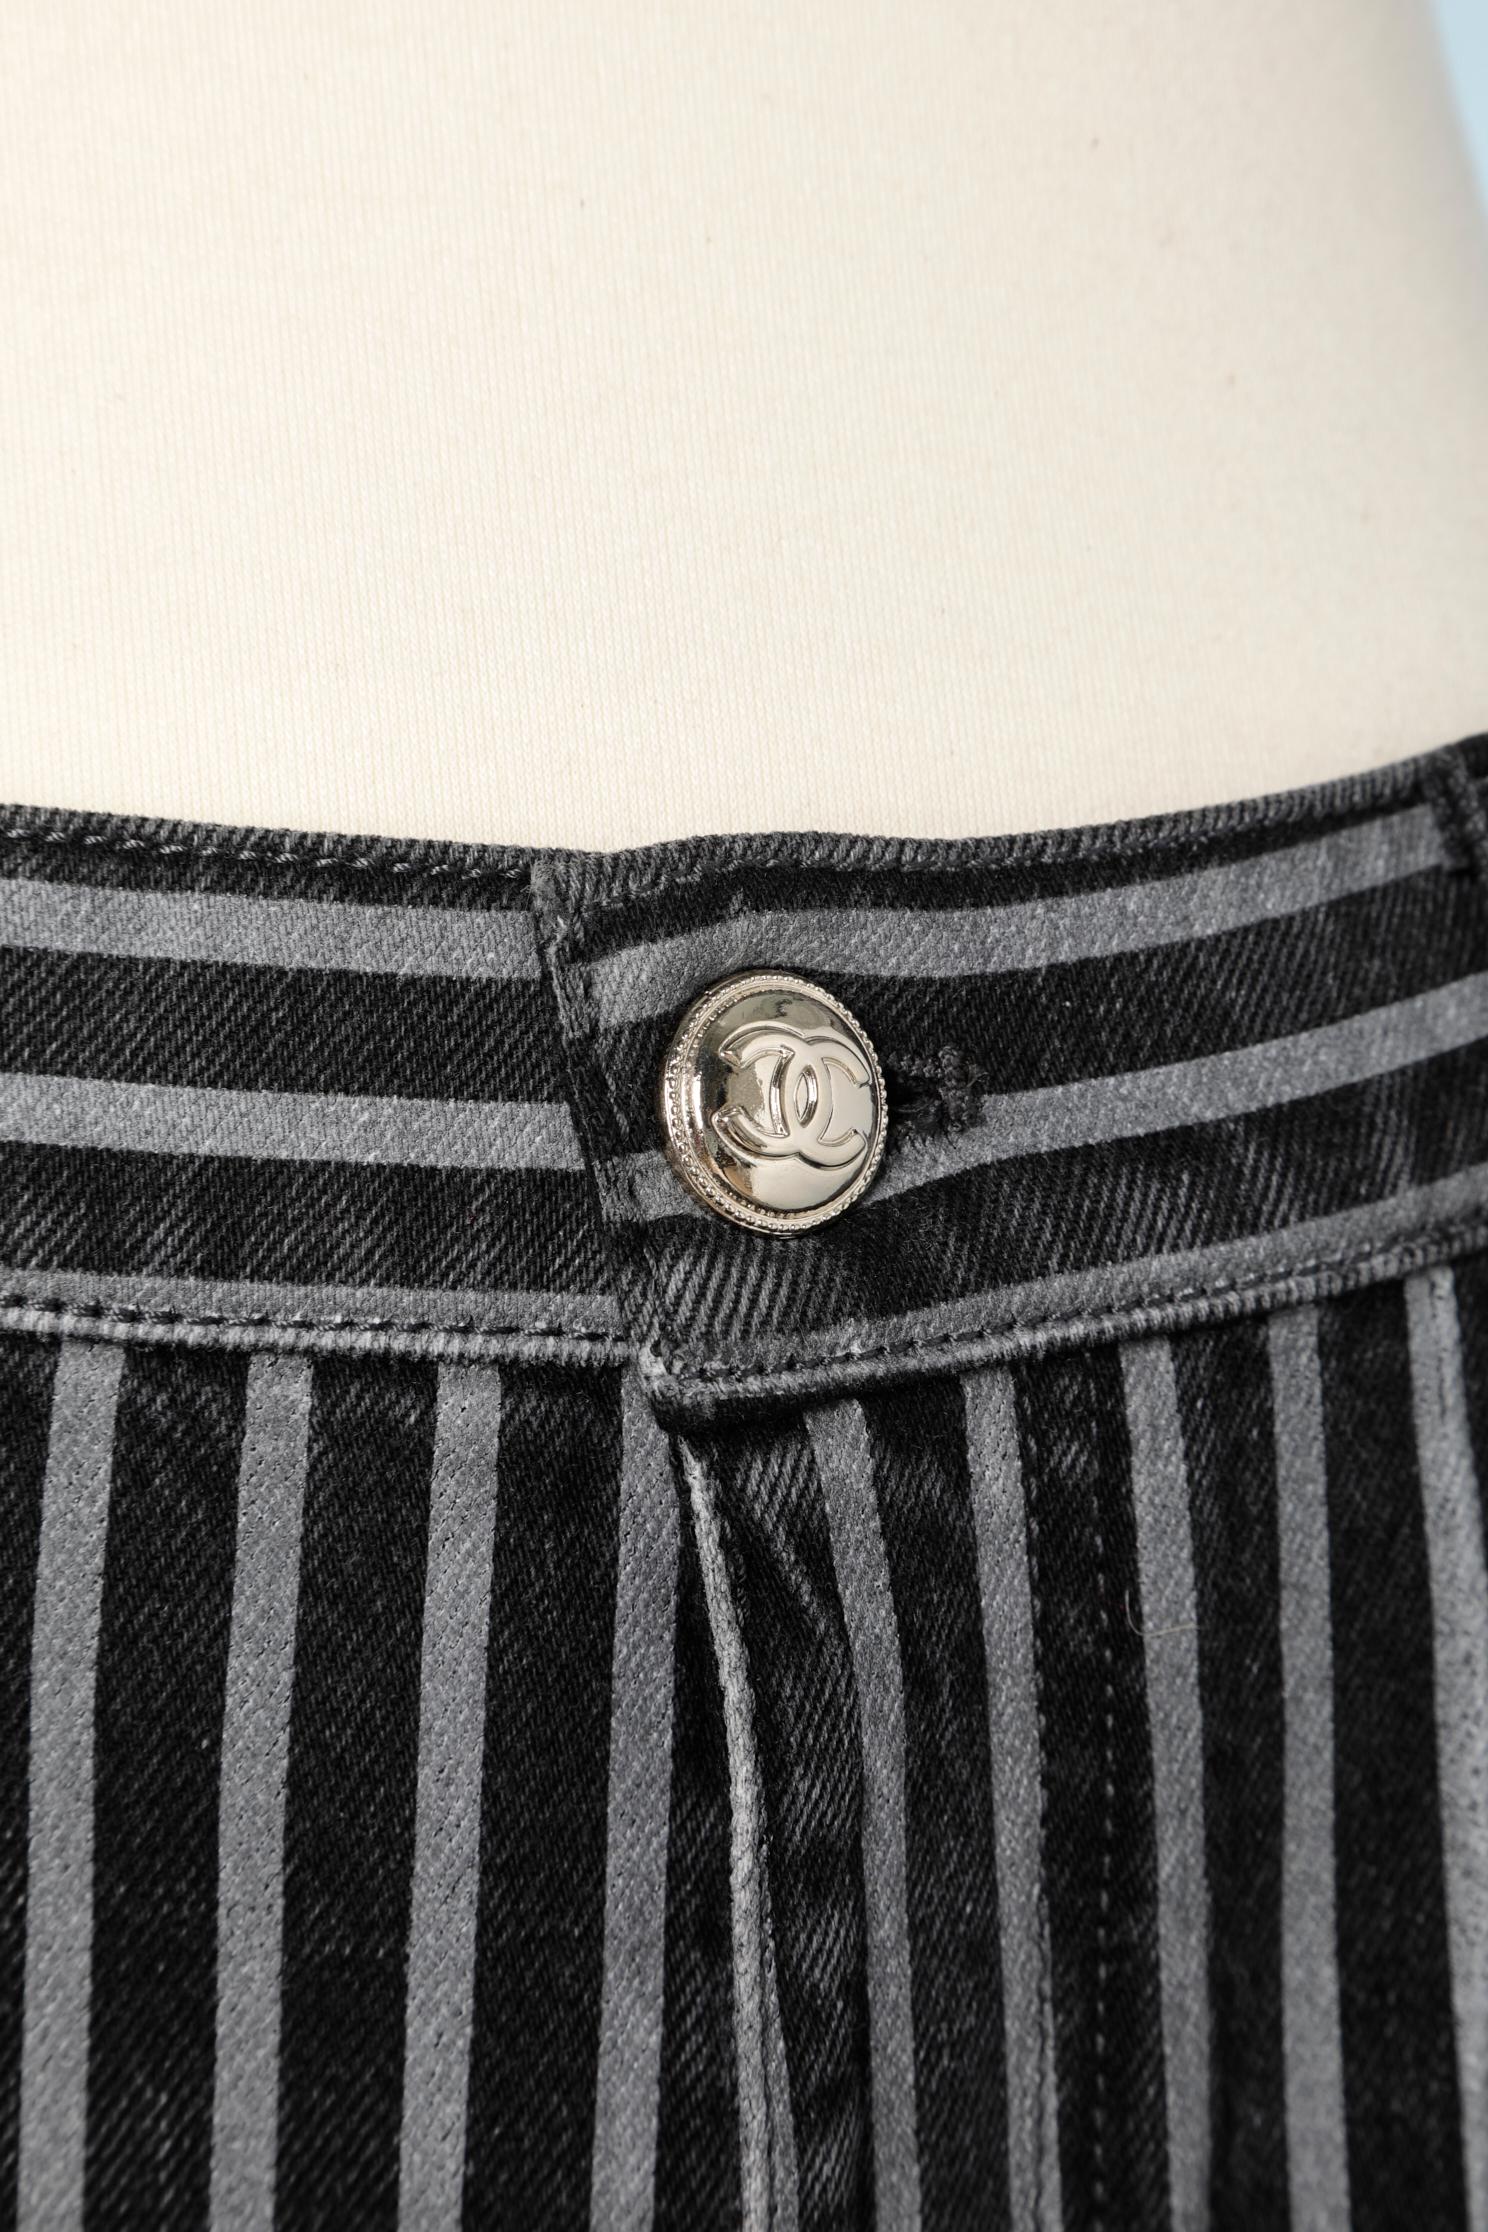 Striped denim pants with branded buttons (Prototype)
SIZE 40 (M) 